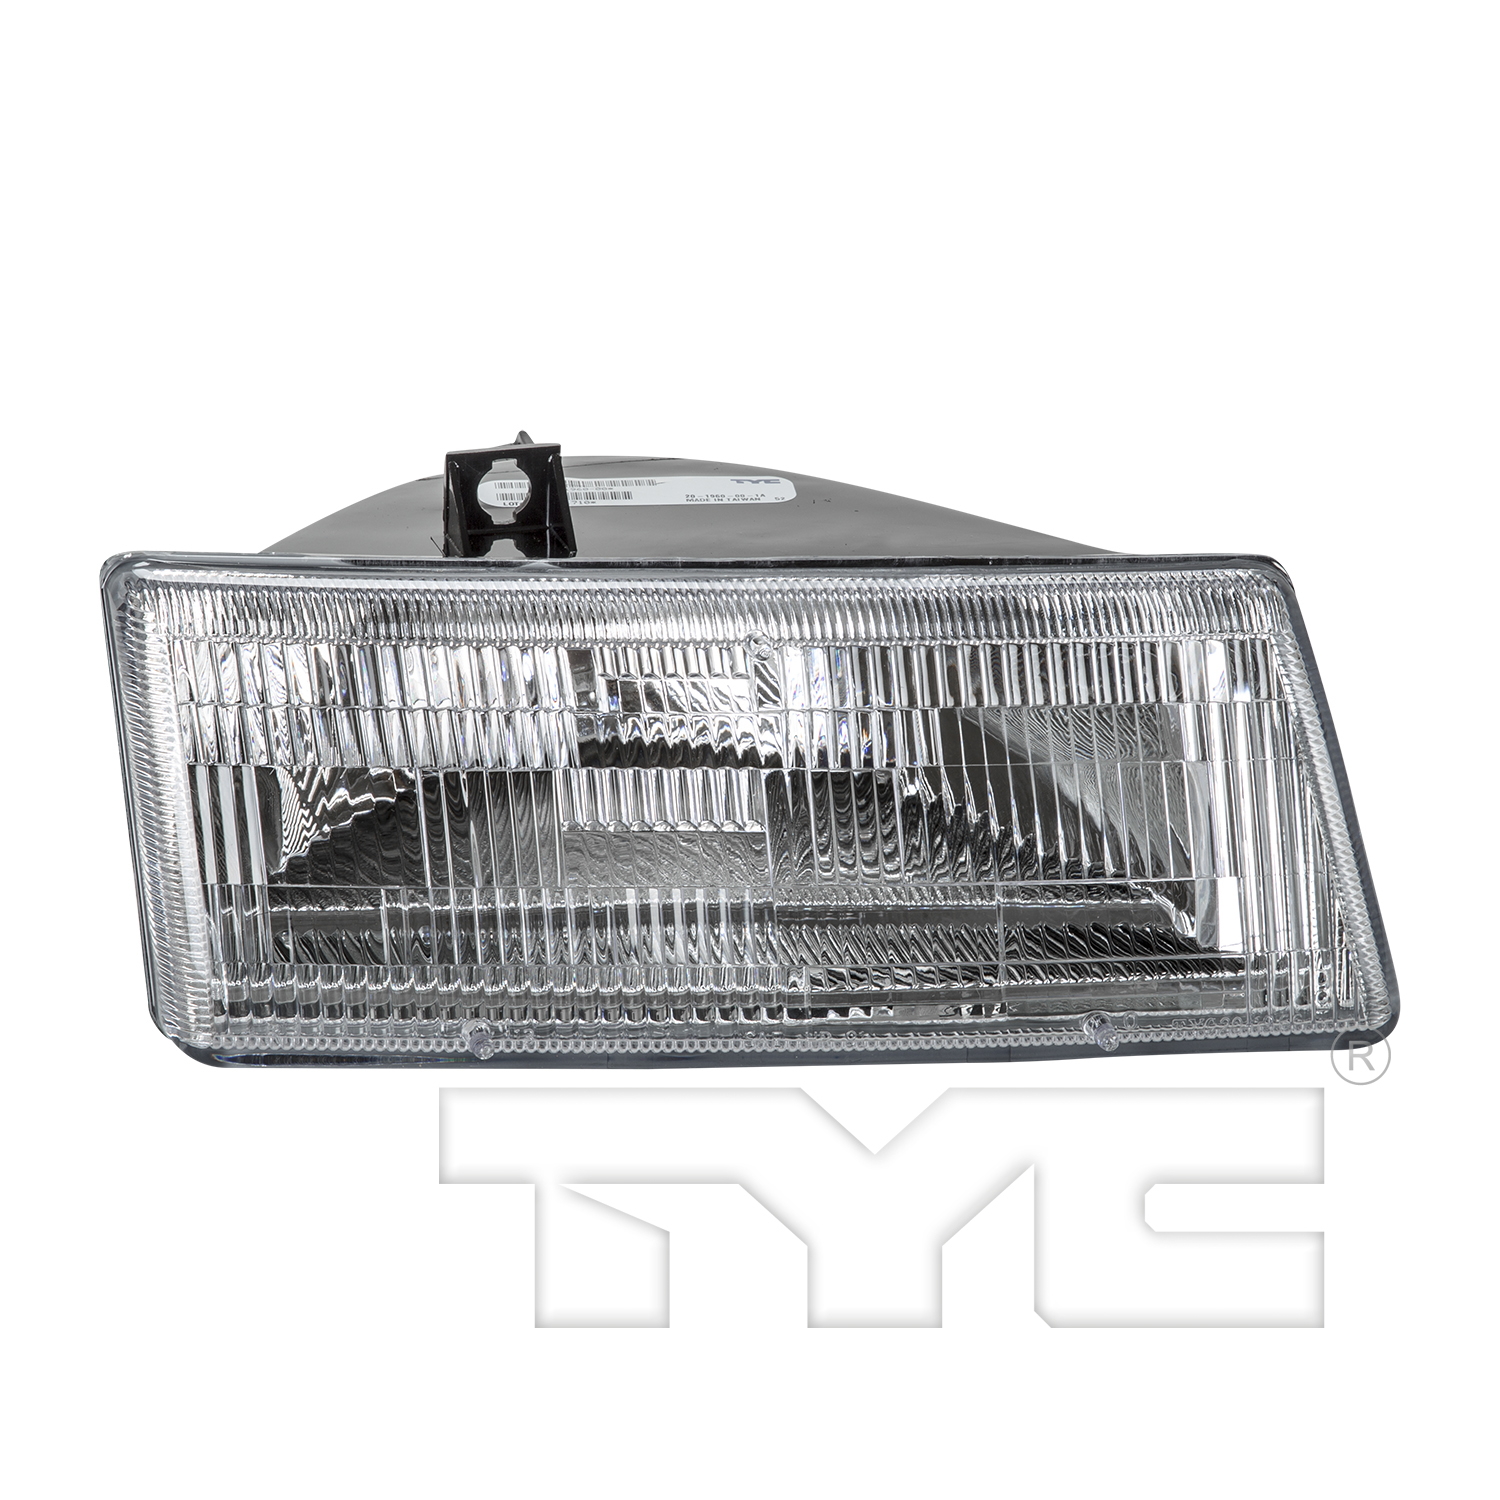 Aftermarket HEADLIGHTS for PLYMOUTH - VOYAGER, VOYAGER,91-95,RT Headlamp lens/housing